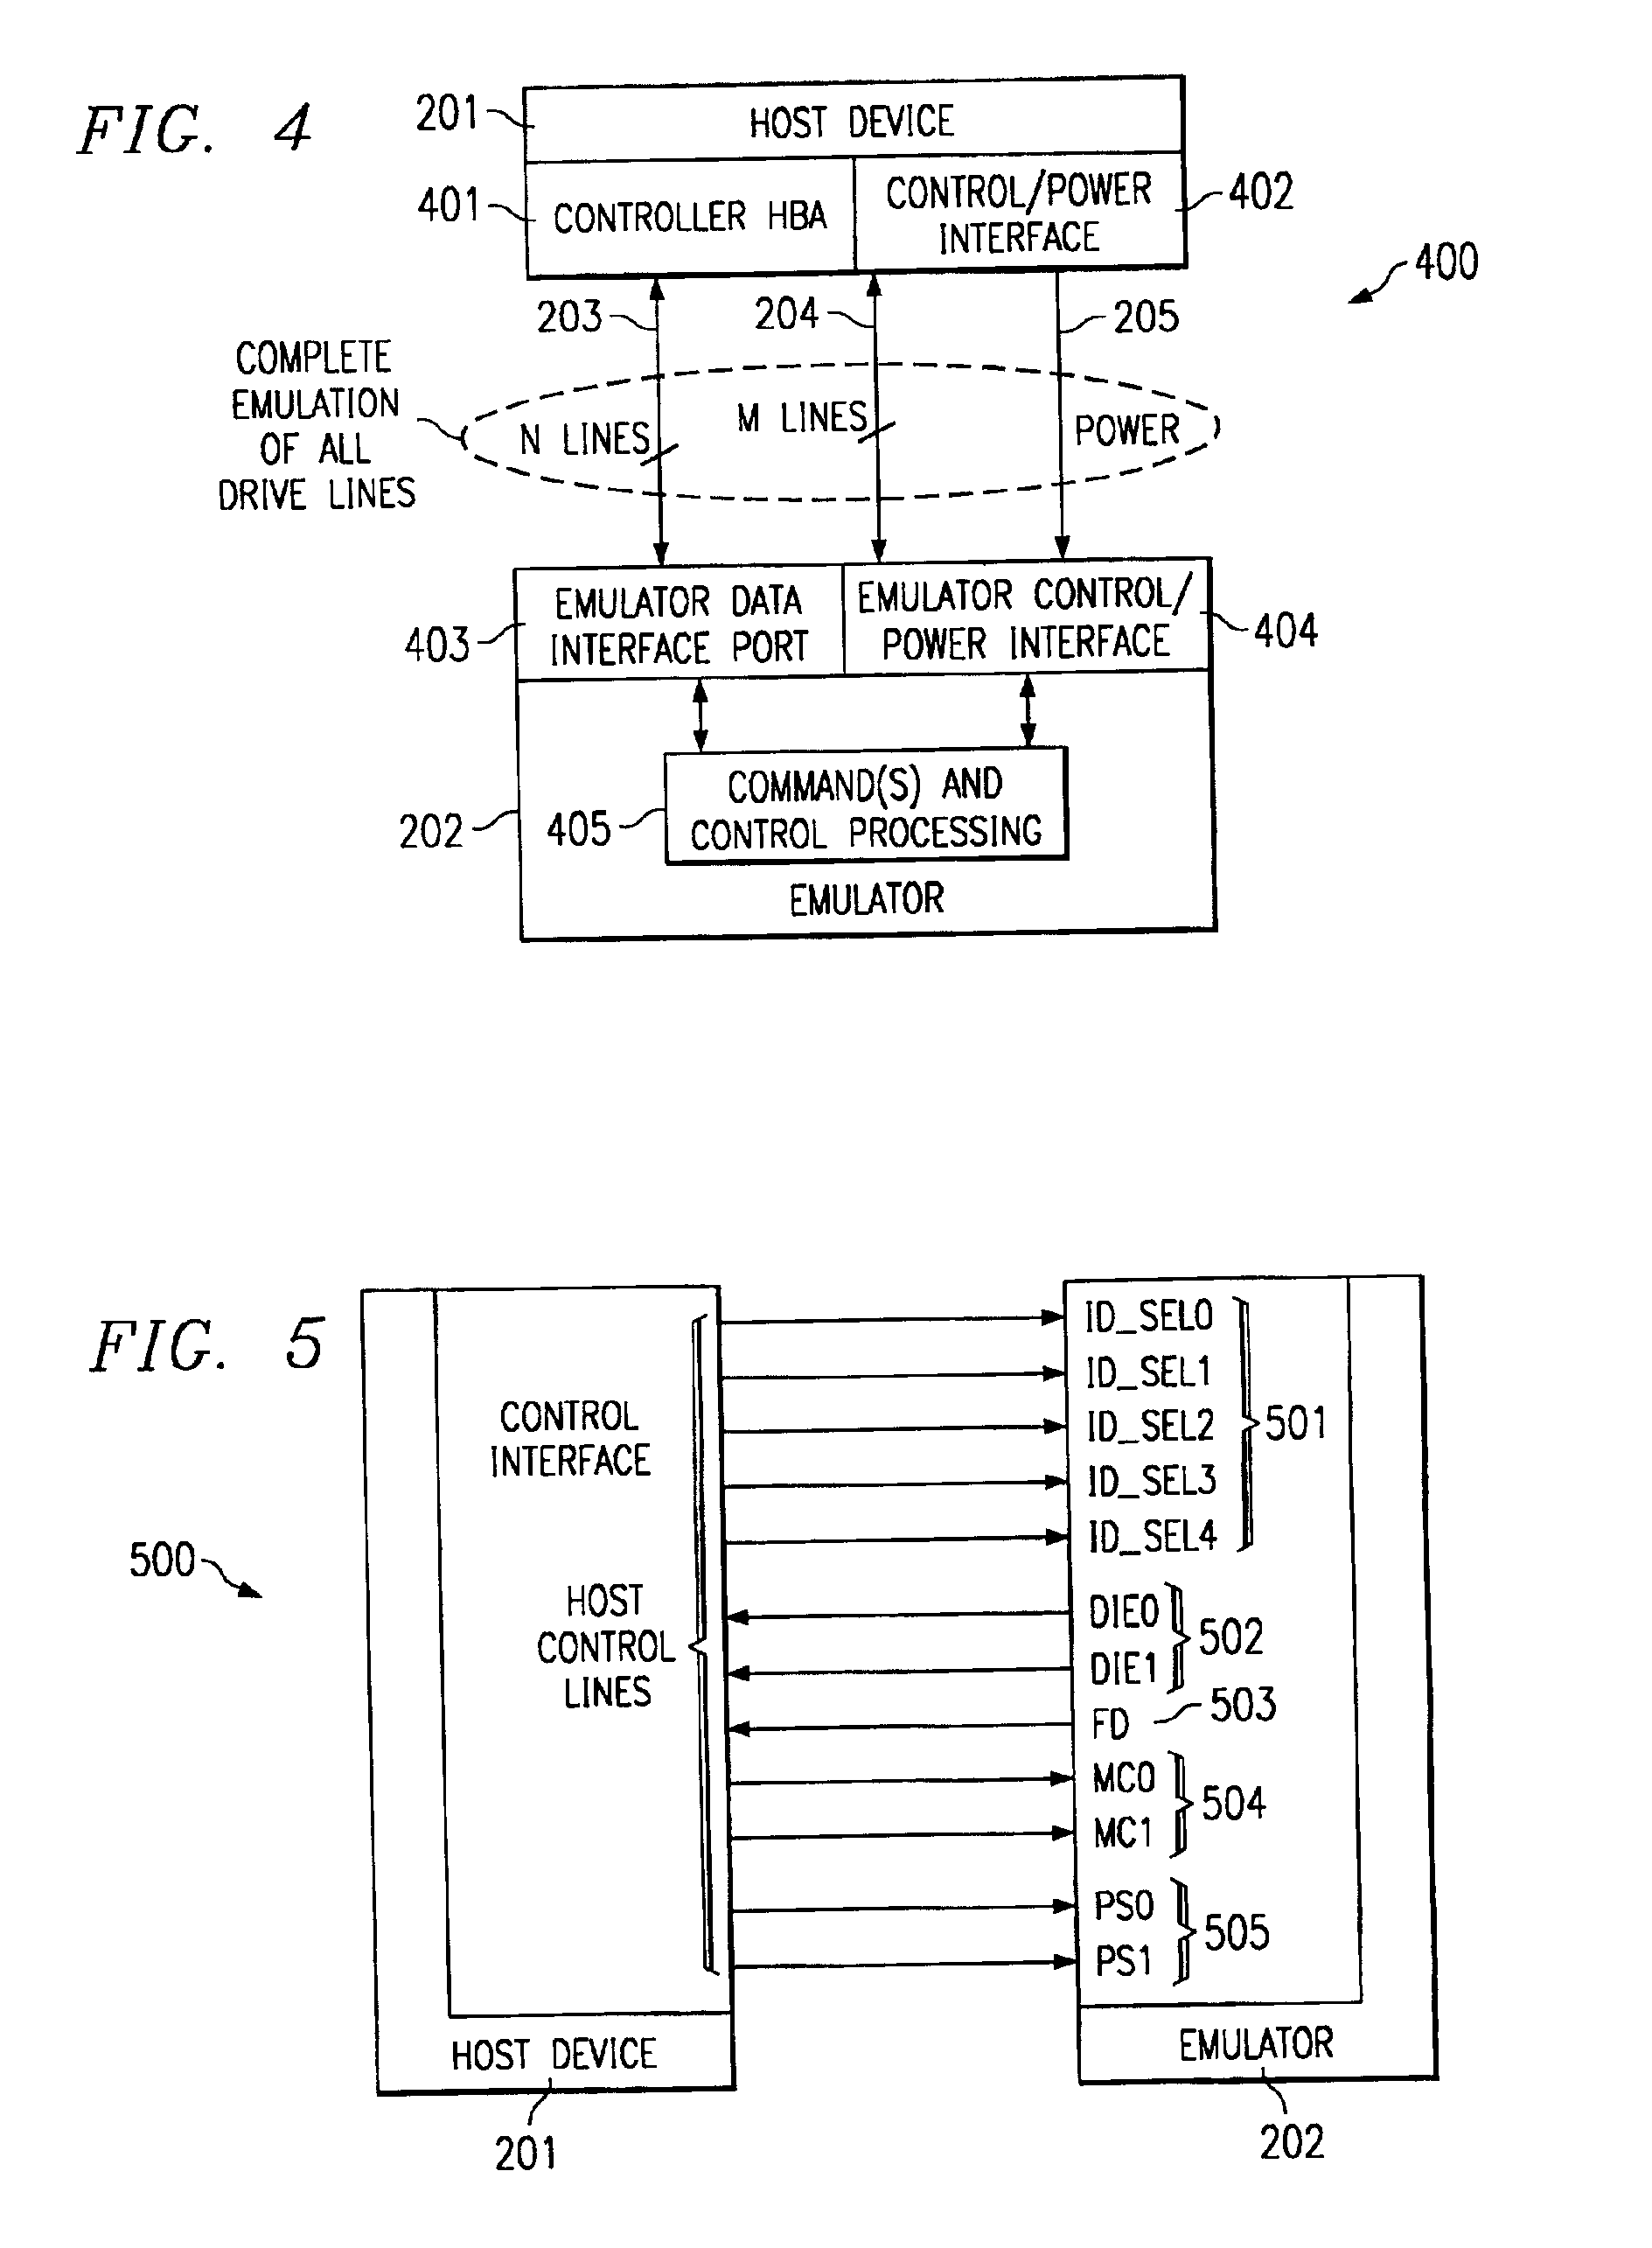 Emulation of dynamically reconfigurable computer system